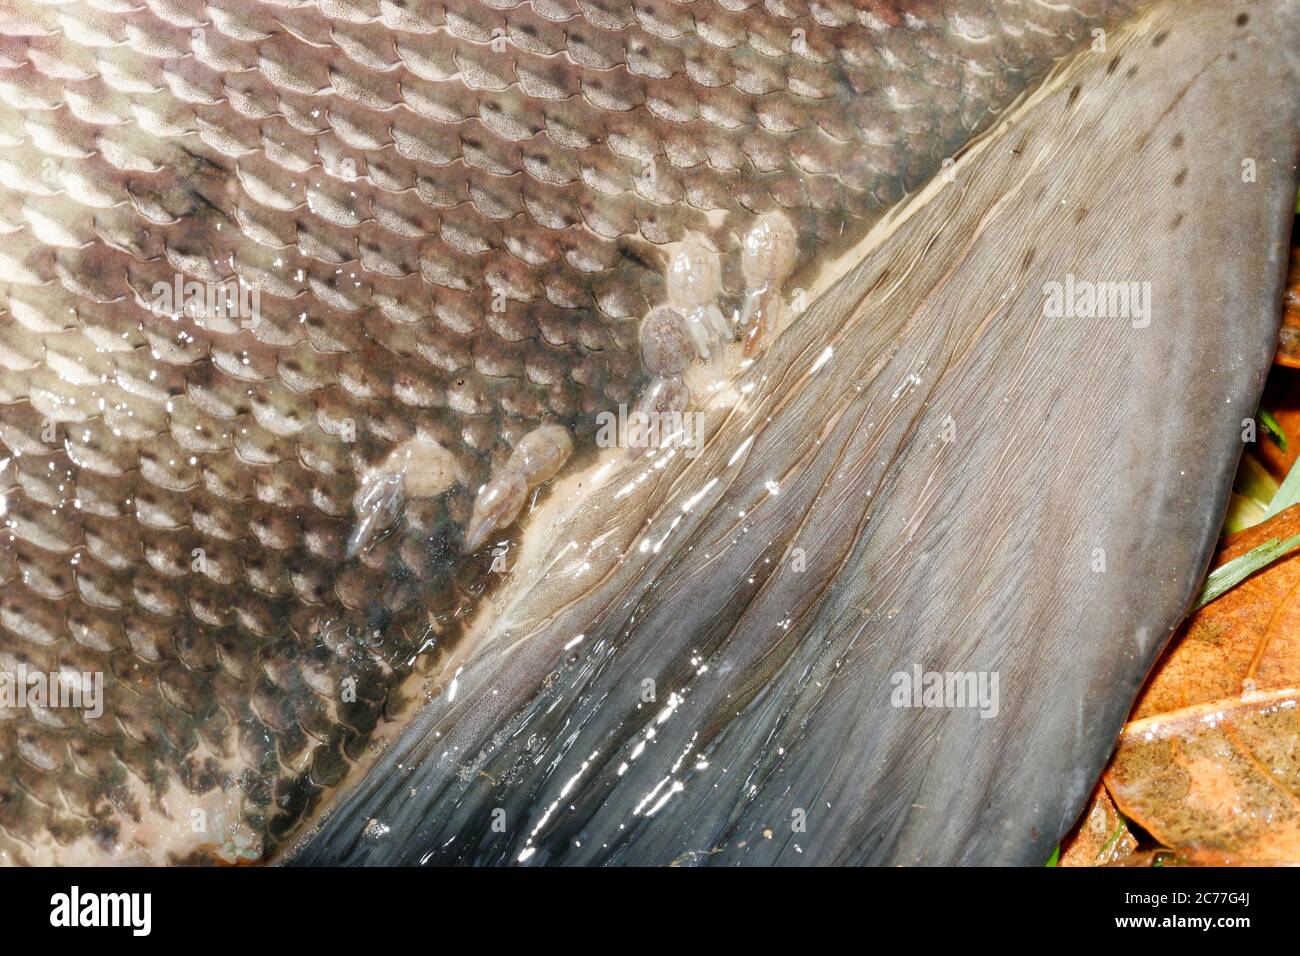 Several salmon louse (Lepeophtheirus salmonis) found on a Chum salmon caught in the Puntledge River in Courtenay, British Columbia, Canada. Stock Photo